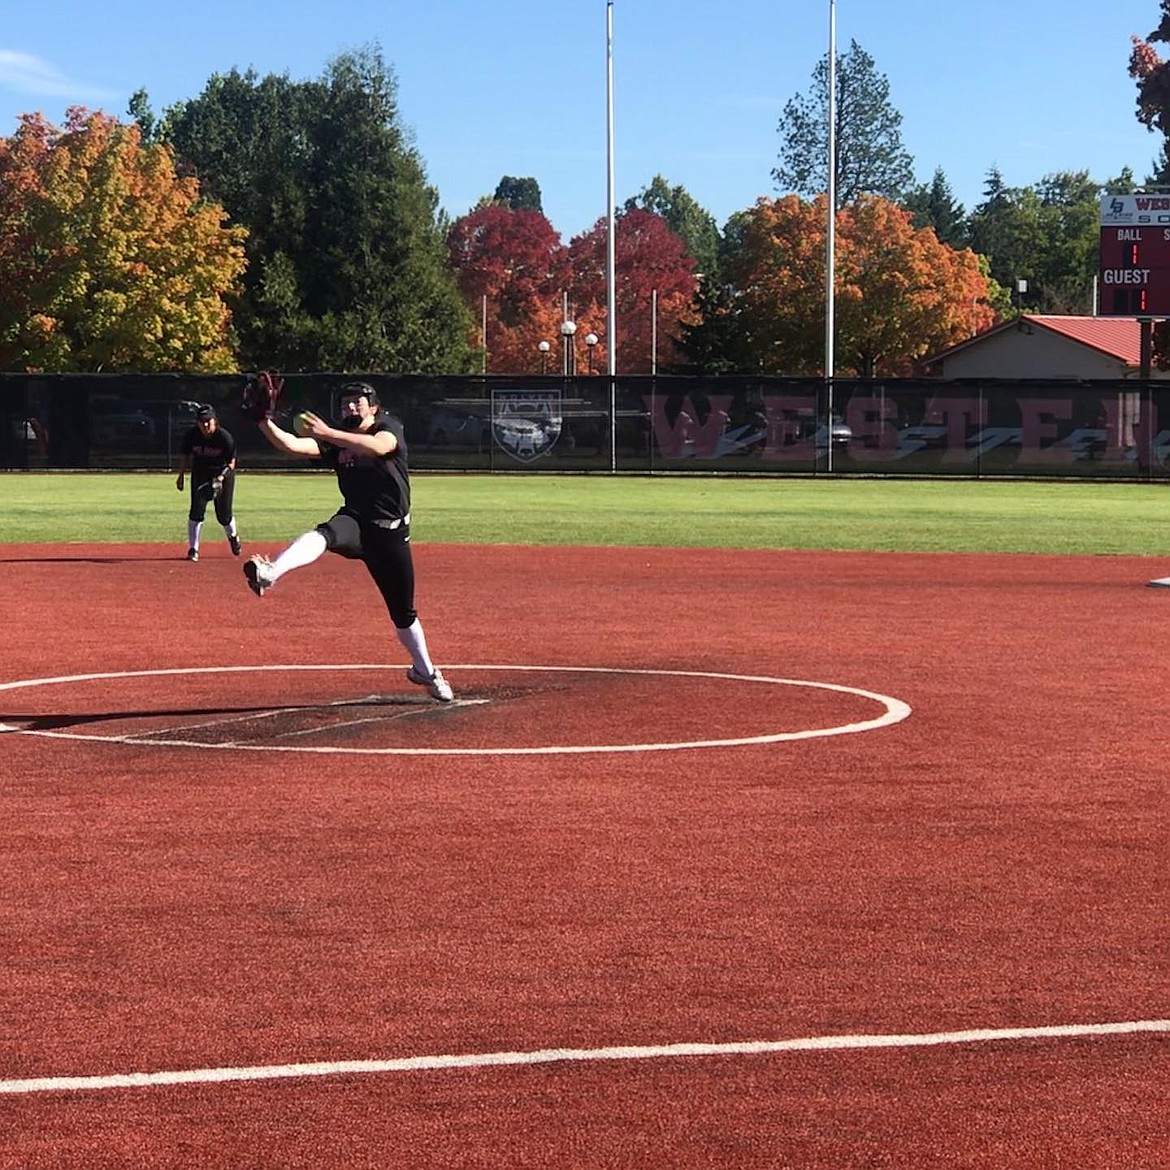 Courtesy photo
Phoebe Schultze pitched five innings of one-hit, one-run ball for Mt. Hood Community College of Gresham, Ore., against Western Oregon in a 2-1 loss on Oct. 3. Schultze has nine innings in two games in fall ball with a 1.55 ERA and 14 strikeouts.